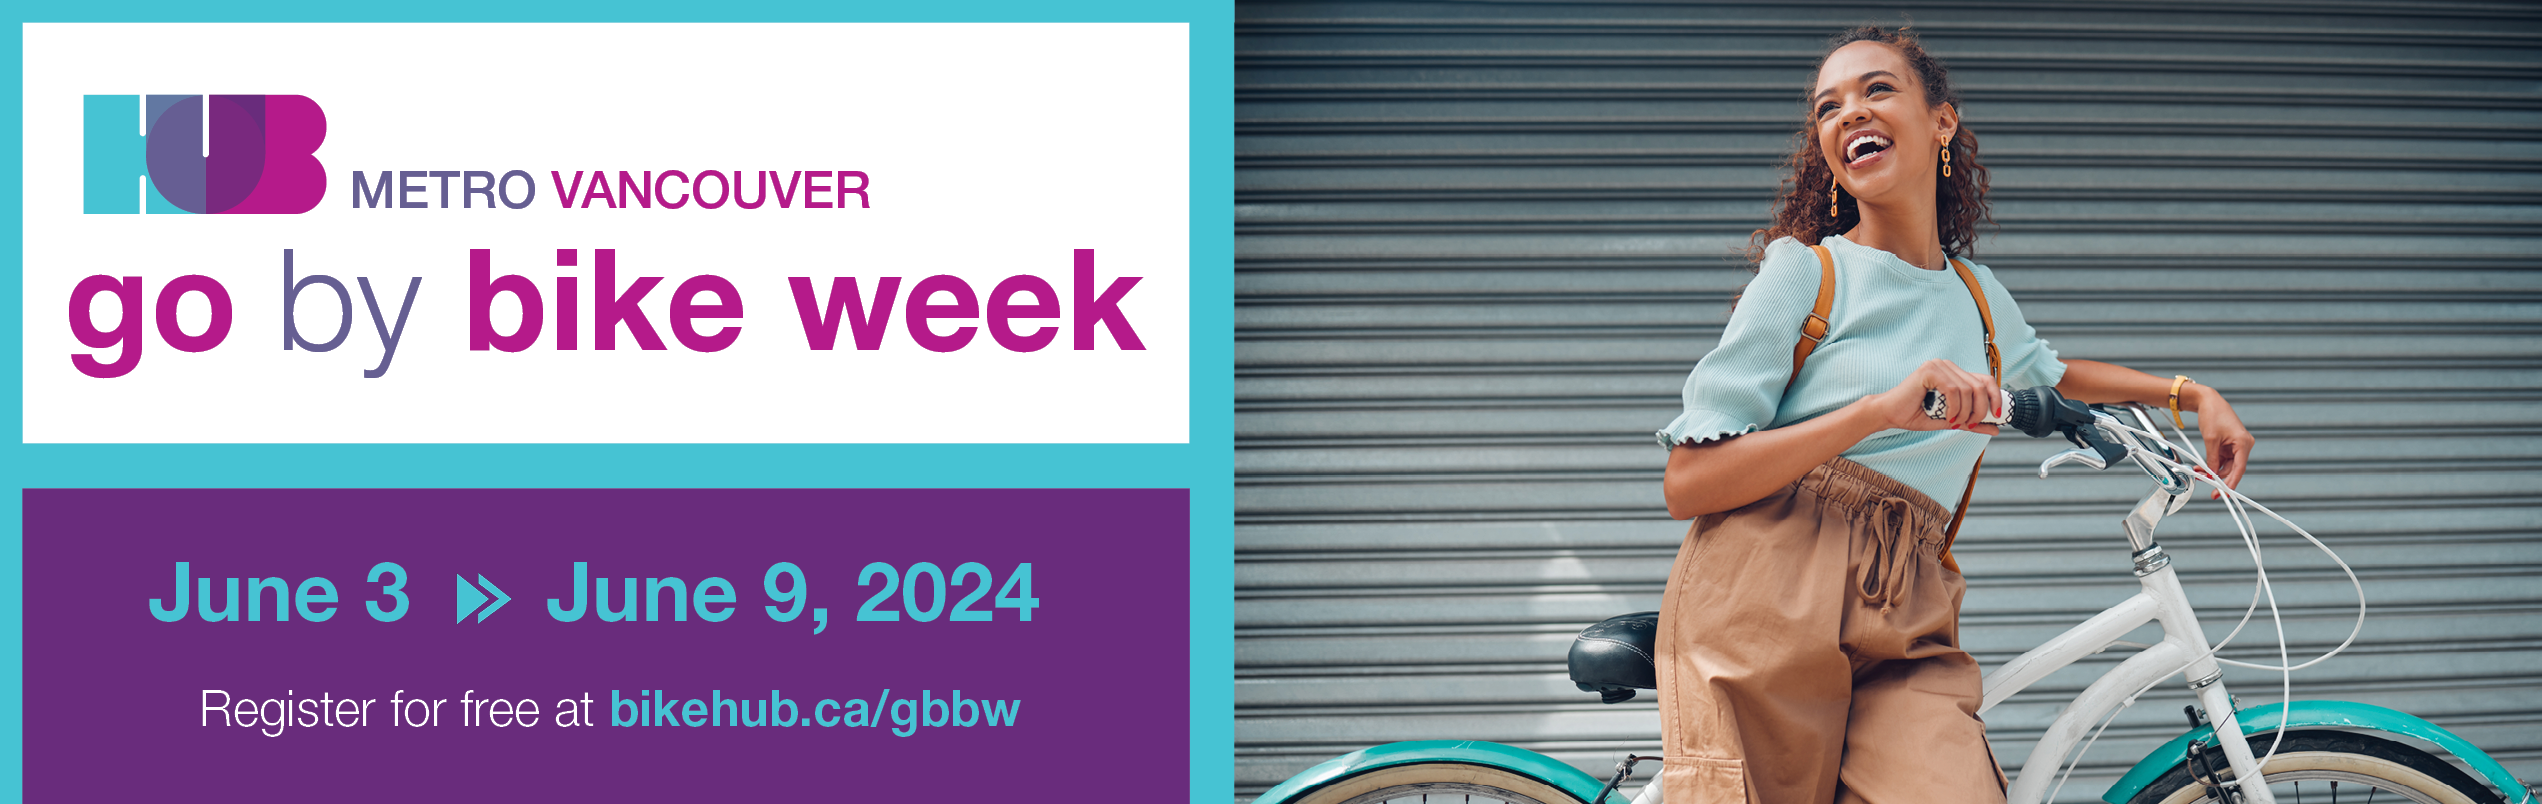 Go by Bike Week banner. The event takes place June 3-9, 2024. Participants can register for free at bikehub.ca/gbbw or logmyride.gobybikebc.ca.